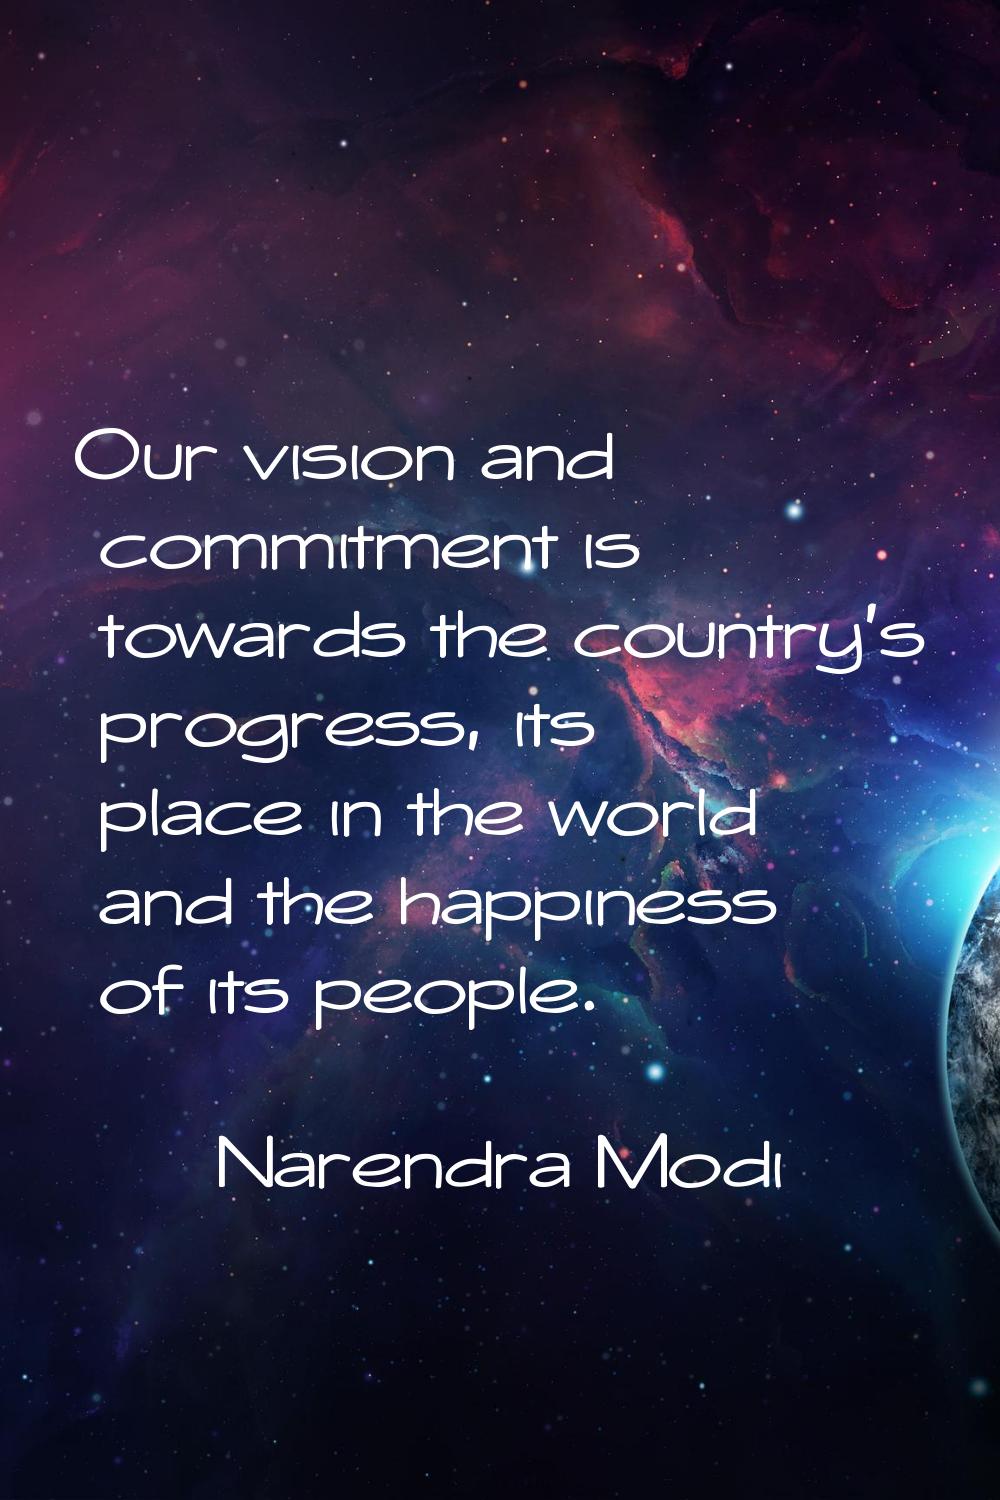 Our vision and commitment is towards the country's progress, its place in the world and the happine